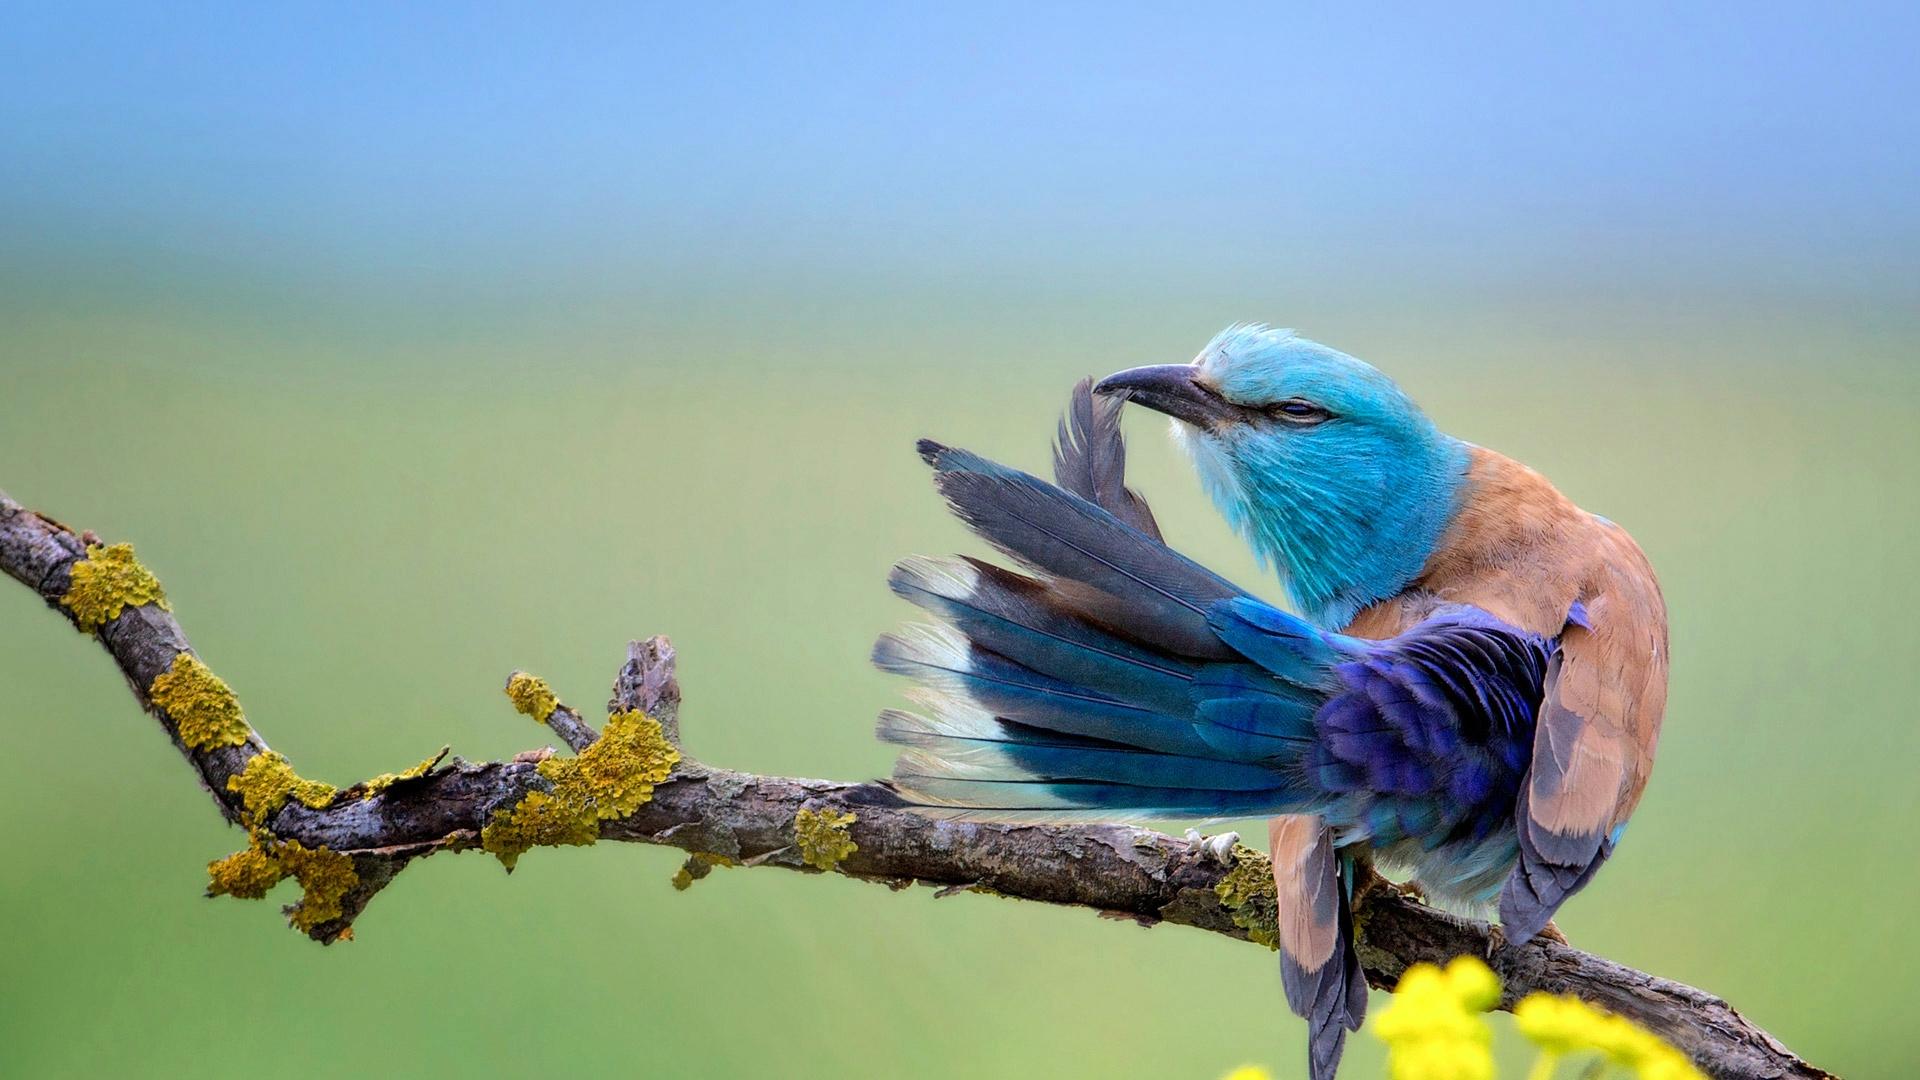 Download 1920x1080 Colorful Bird, Feathers, Branch, Birds Wallpaper